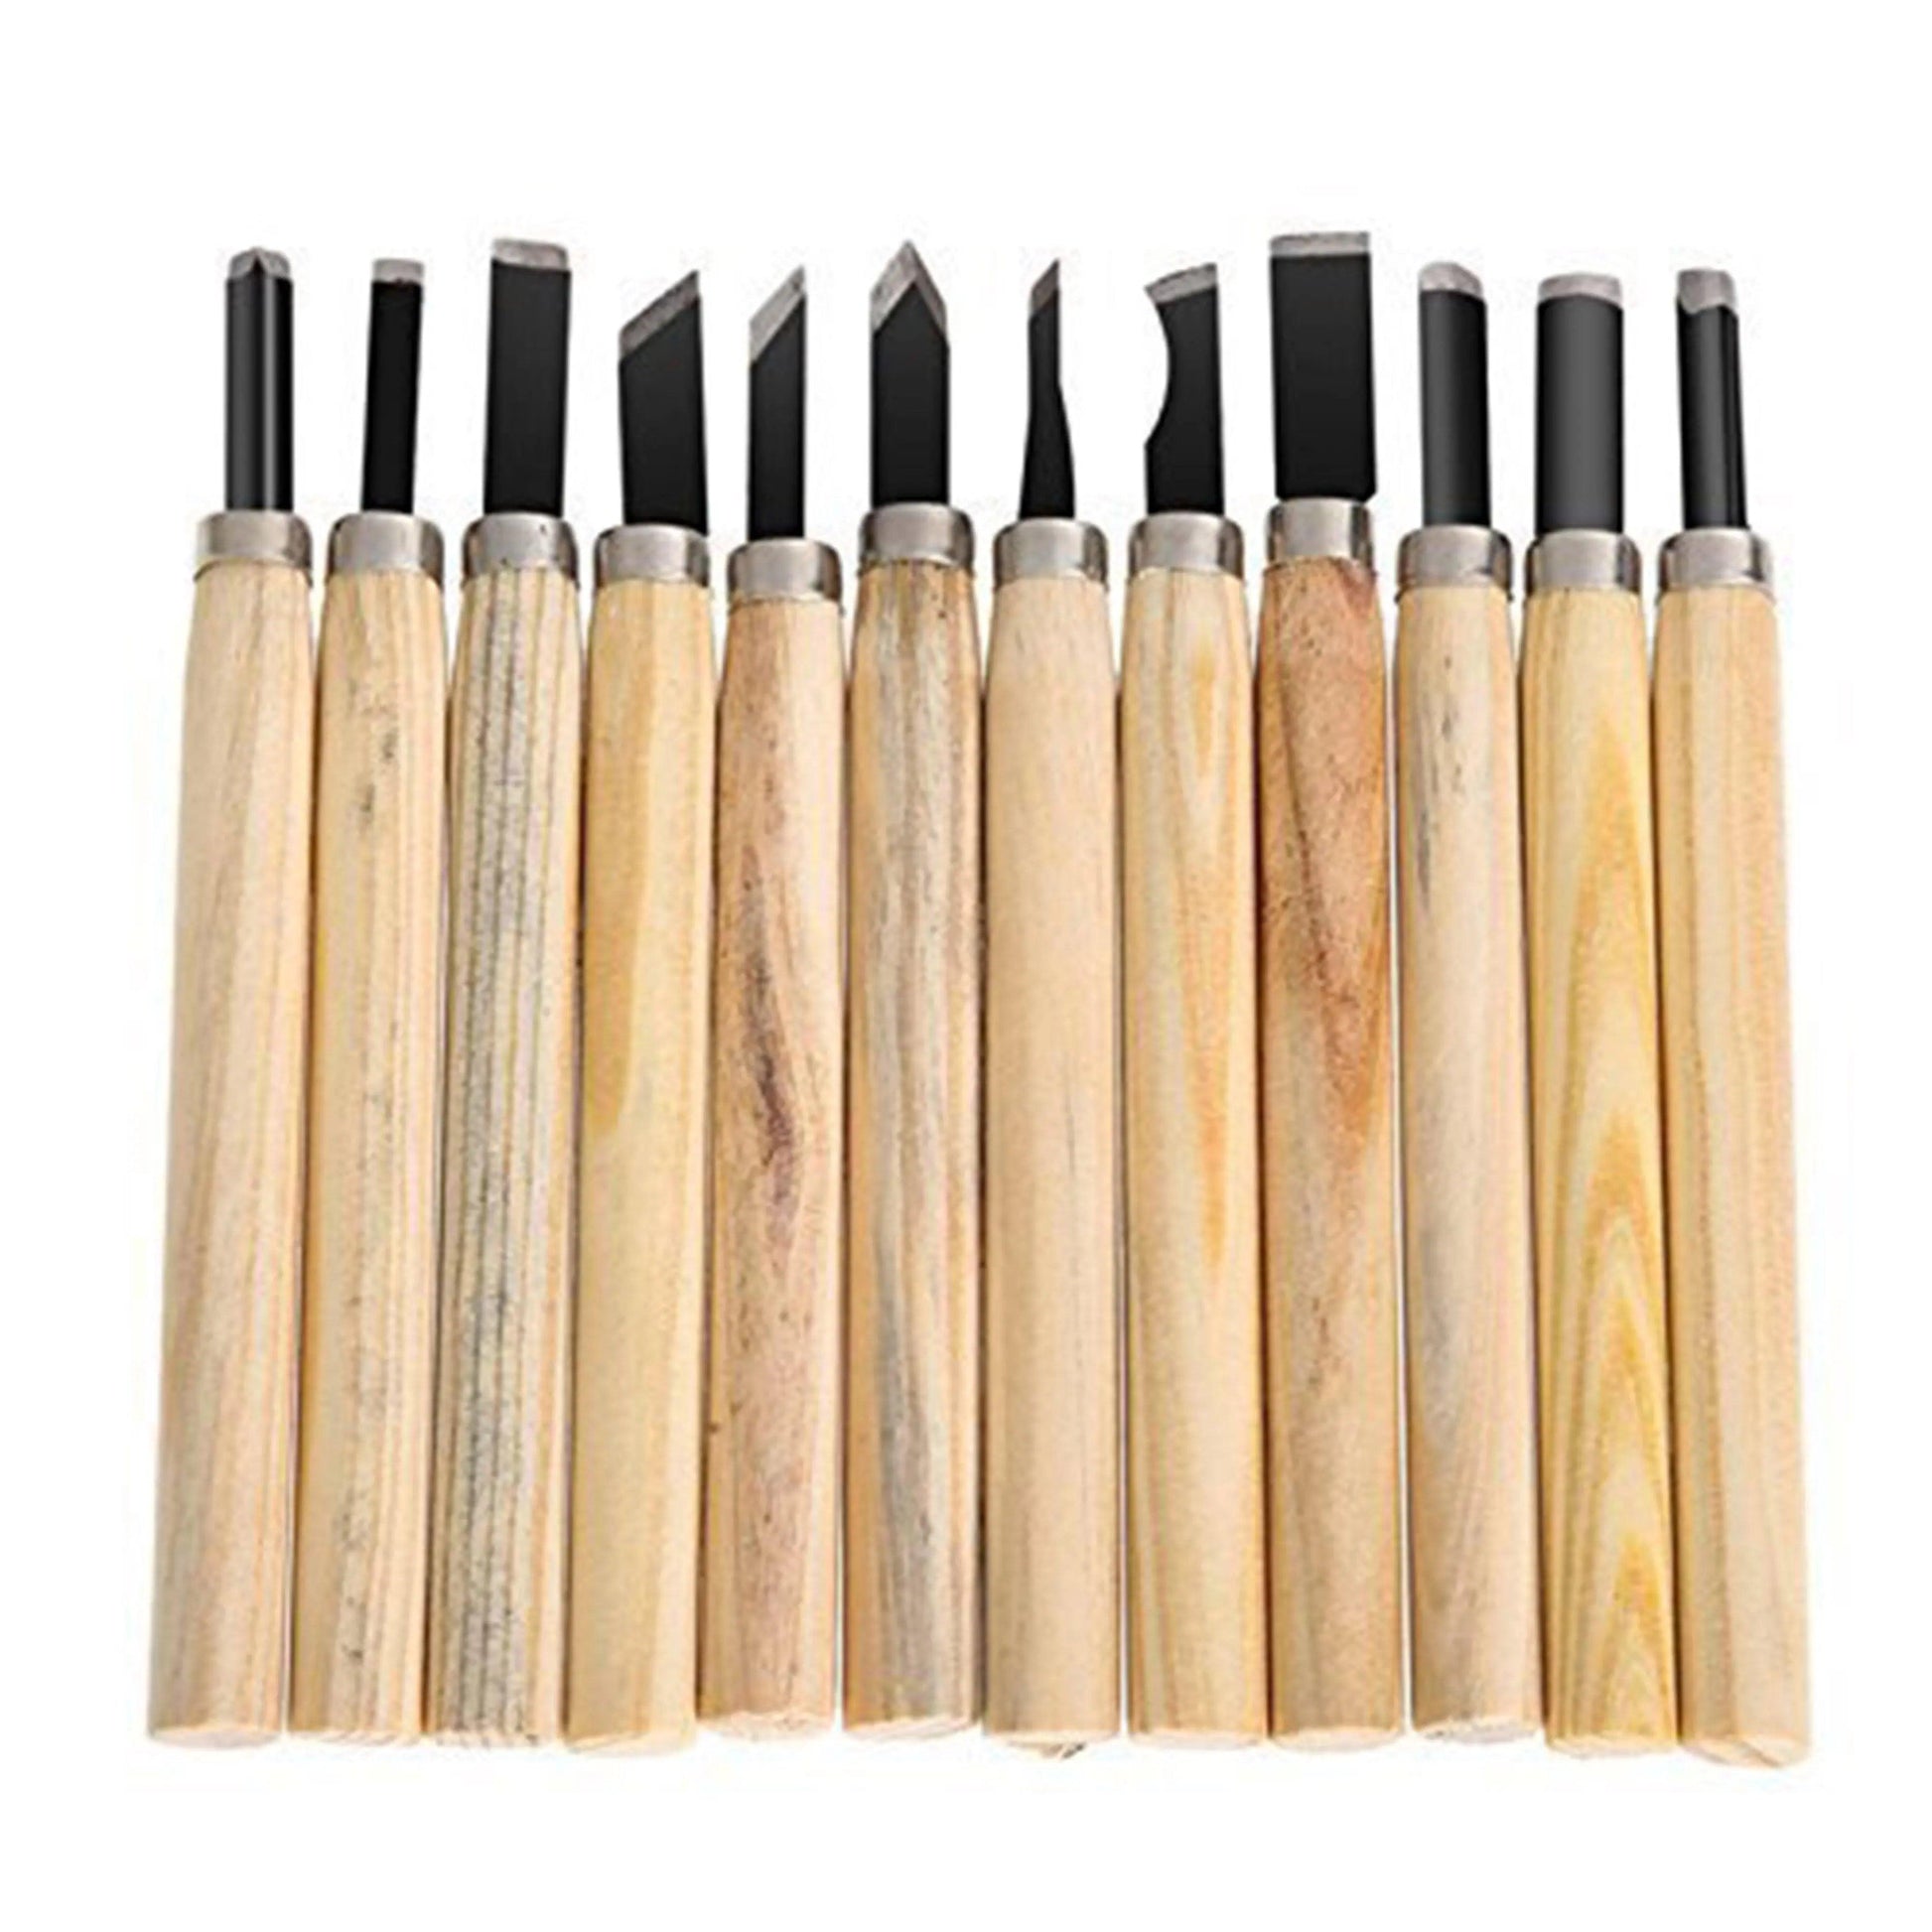 Wooden Carving Set of 12 The Stationers